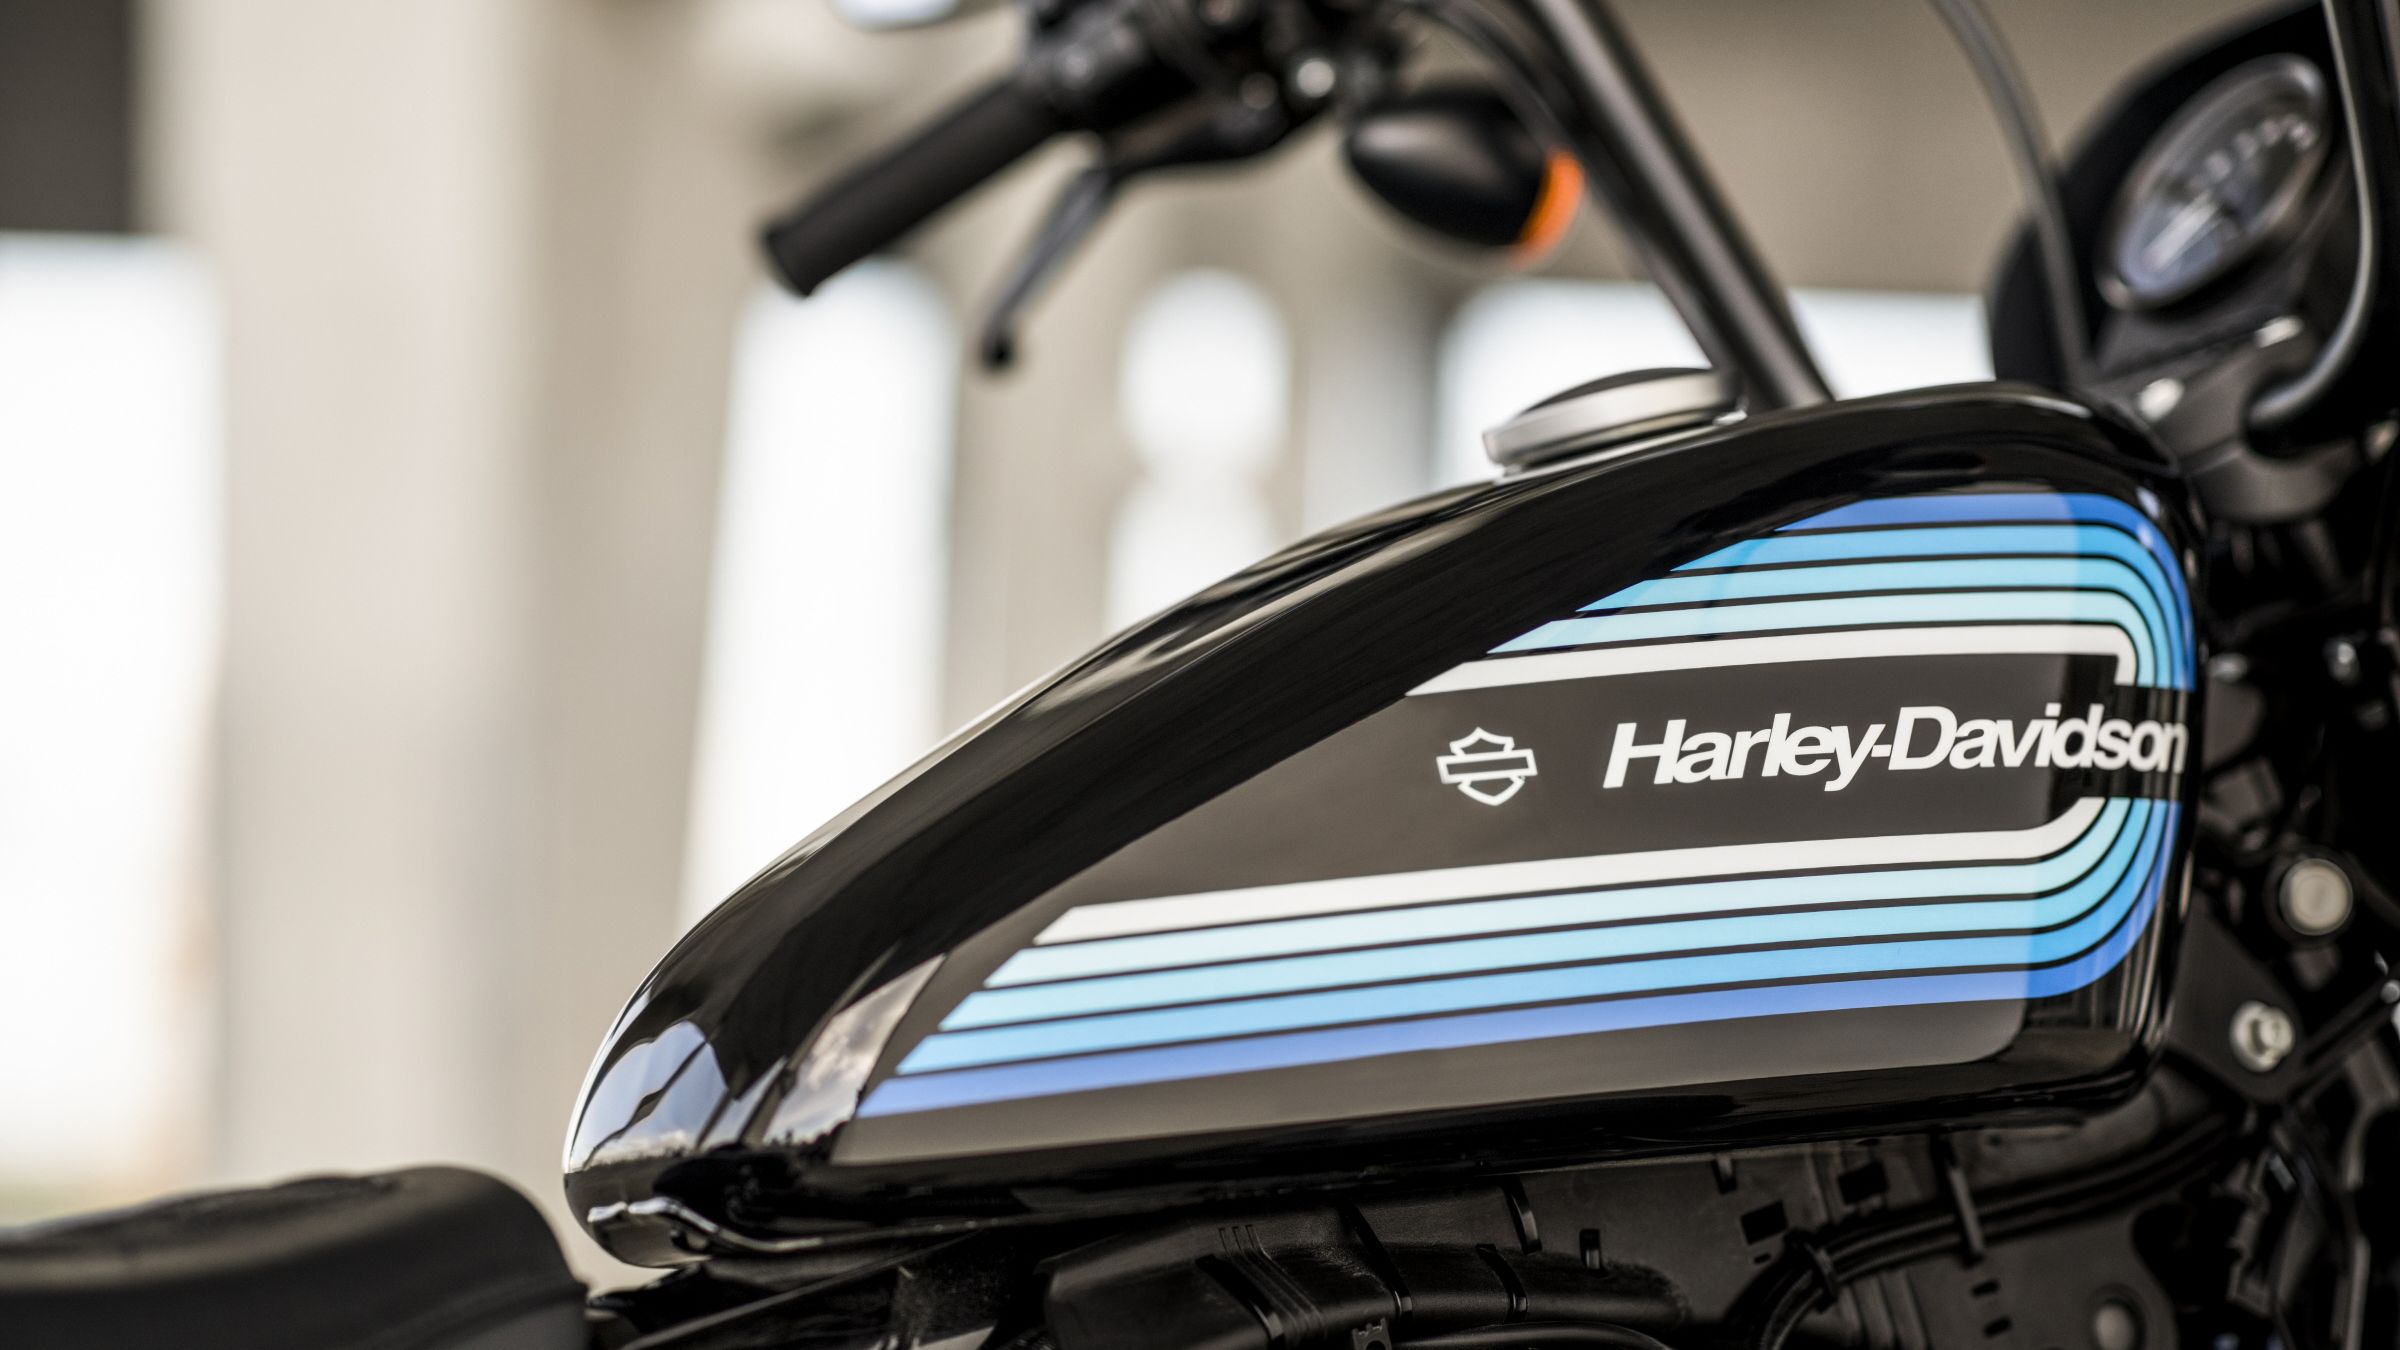 HARLEY-DAVIDSON SPORTSTER 1200 Iron (2018-2021) Review